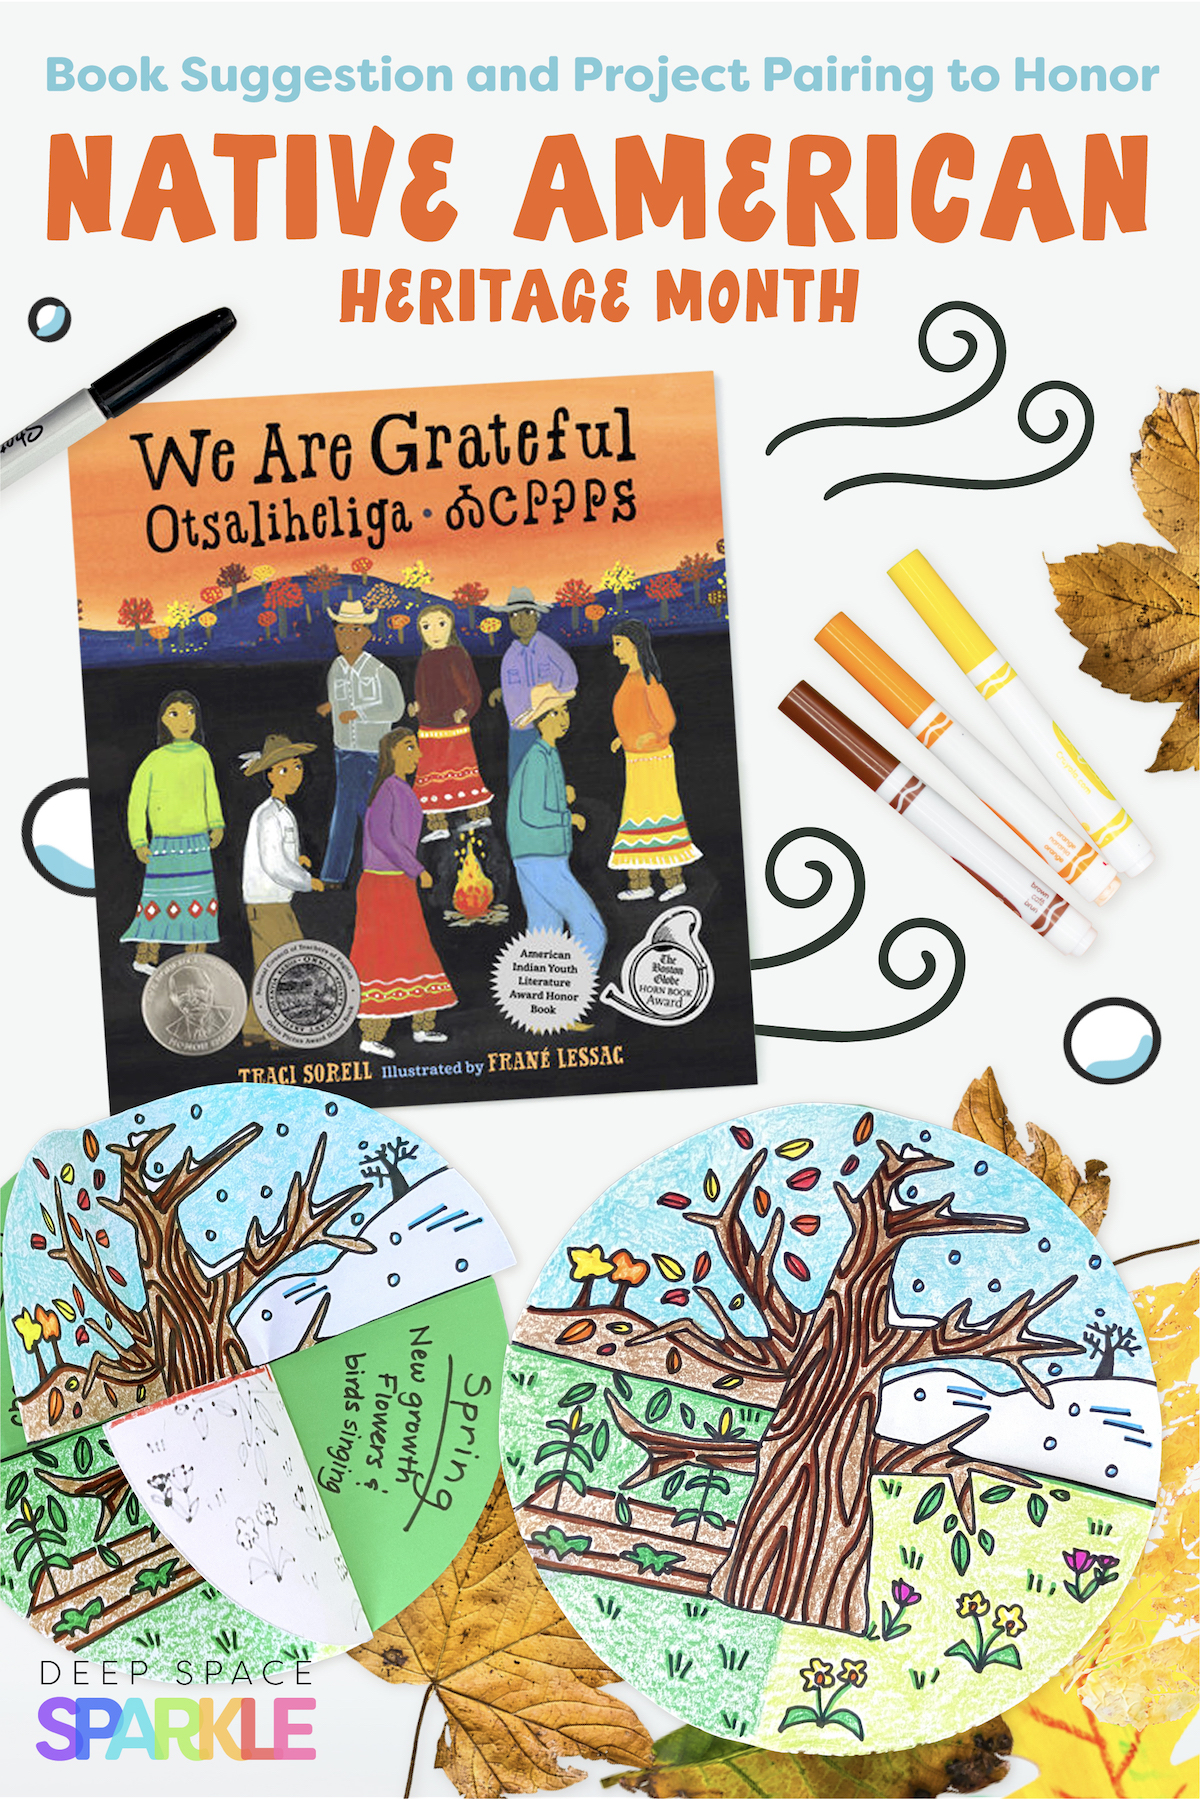 Book Suggestion and Project Pairing to Honor Native American Heritage Month with a Fall Leaves project and We Are Grateful children's book, inspiration tied into this Sparklers Lesson